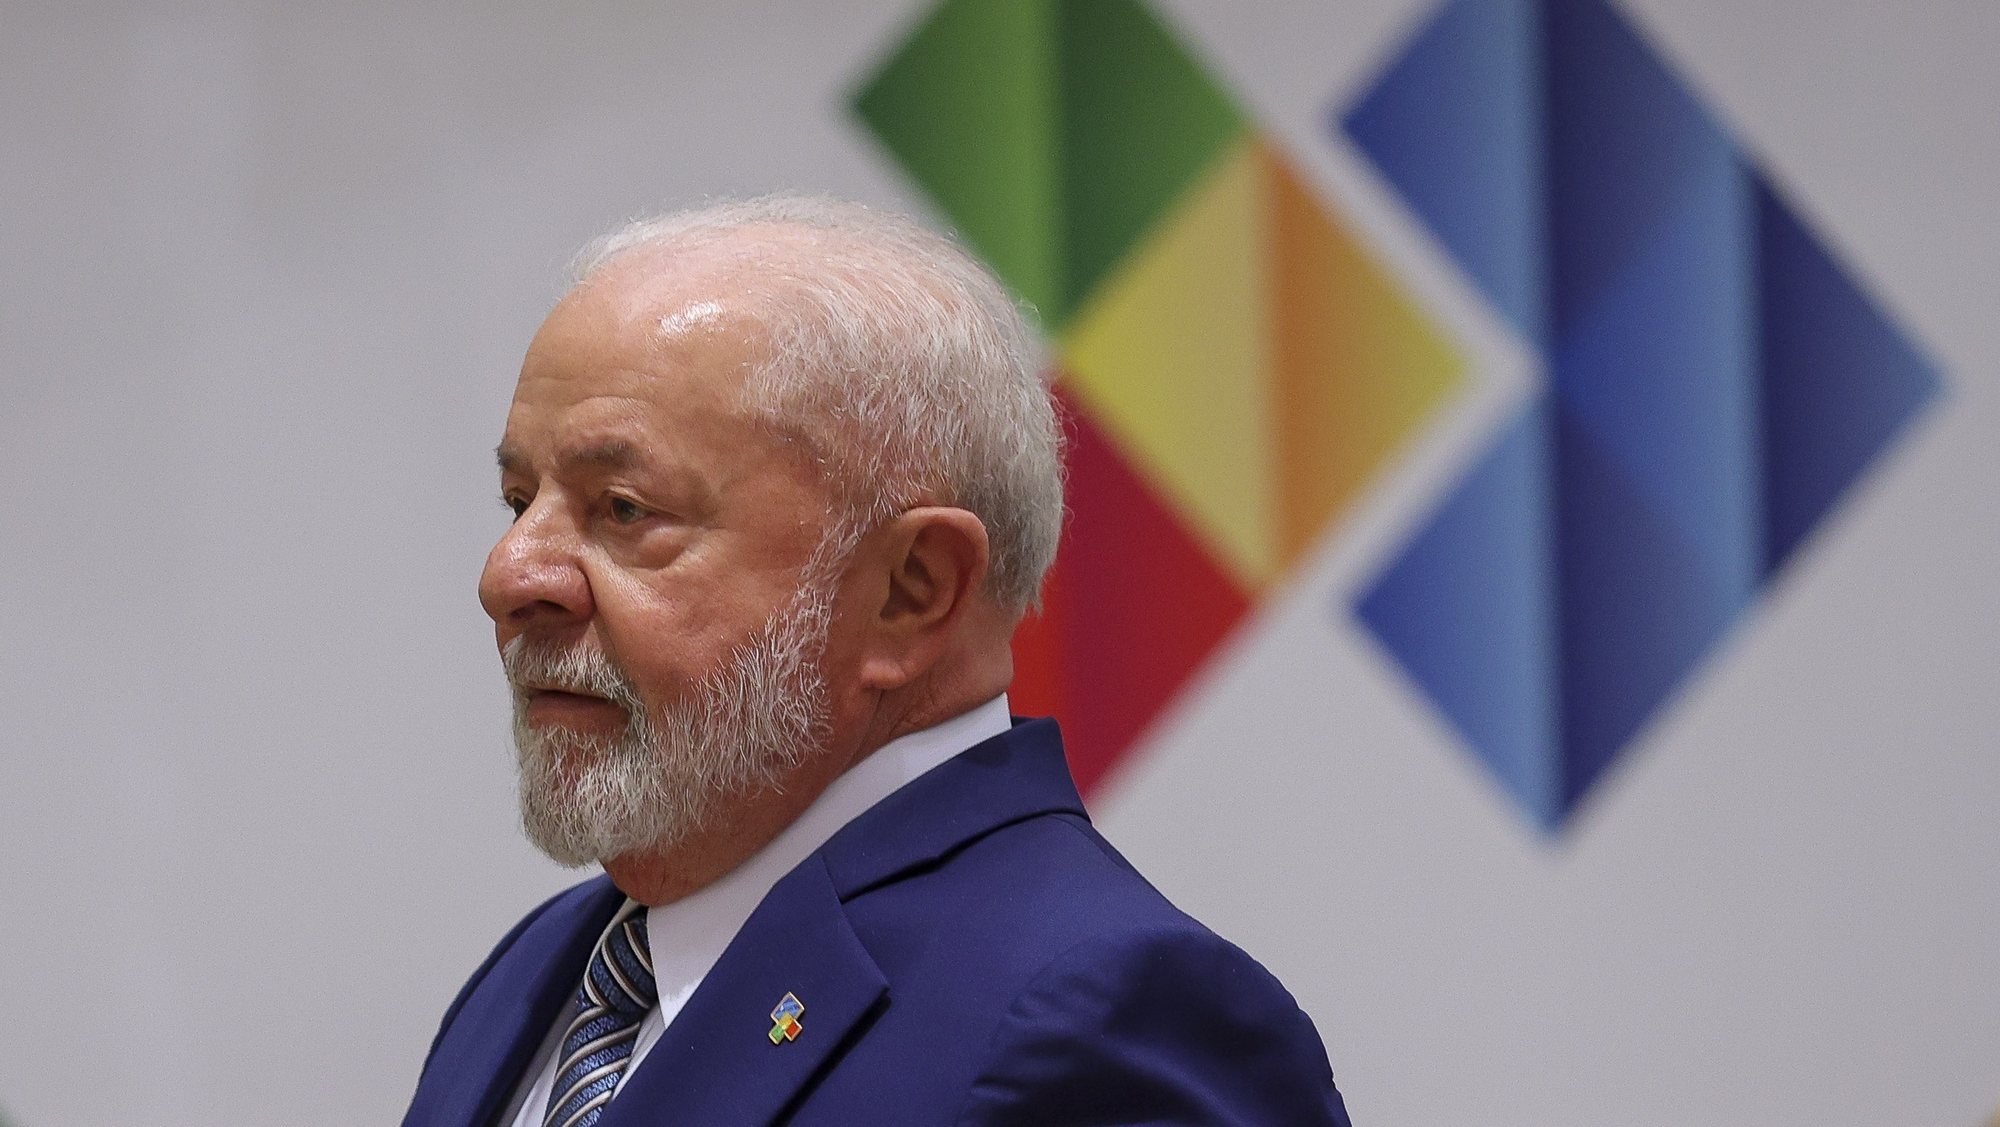 epa10751765 Brazil&#039;s President Luis Ignacio Lula da Silva at the start of the EU-CELAC Summit of Heads of State and Government in Brussels, Belgium, 17 July 2023. Leaders from the EU and the Community of Latin American and Caribbean States (CELAC) gather in Brussels for the third EU-CELAC summit from 17-18 July 2023, with the aim to strengthen relations between both regions.  EPA/JULIEN WARNAND